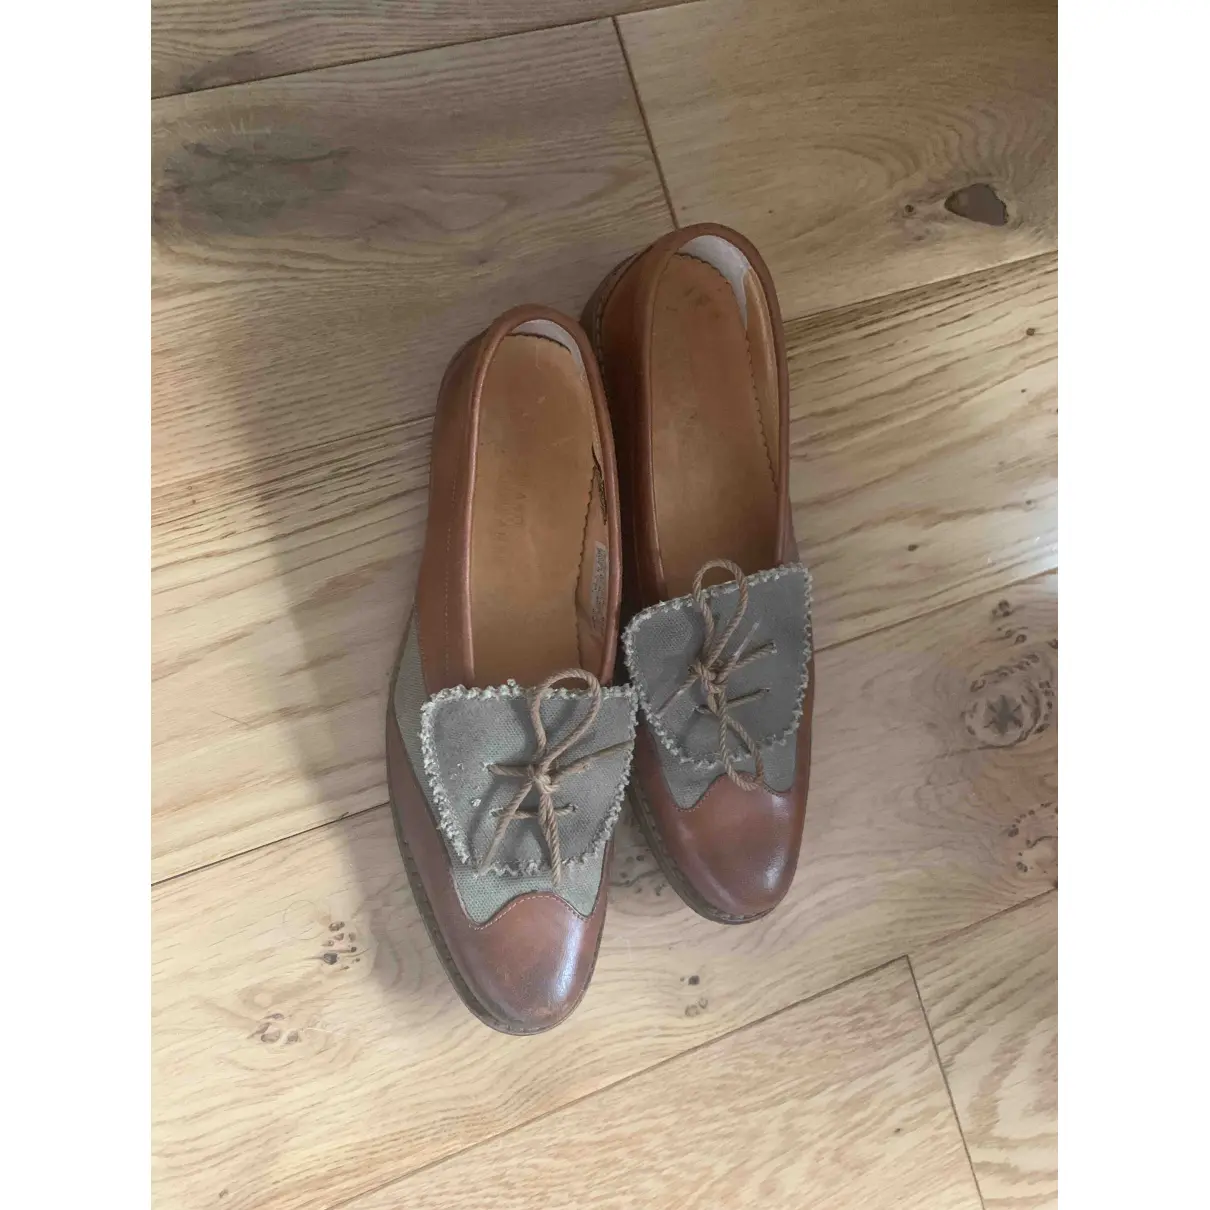 Buy Timberland Leather flats online